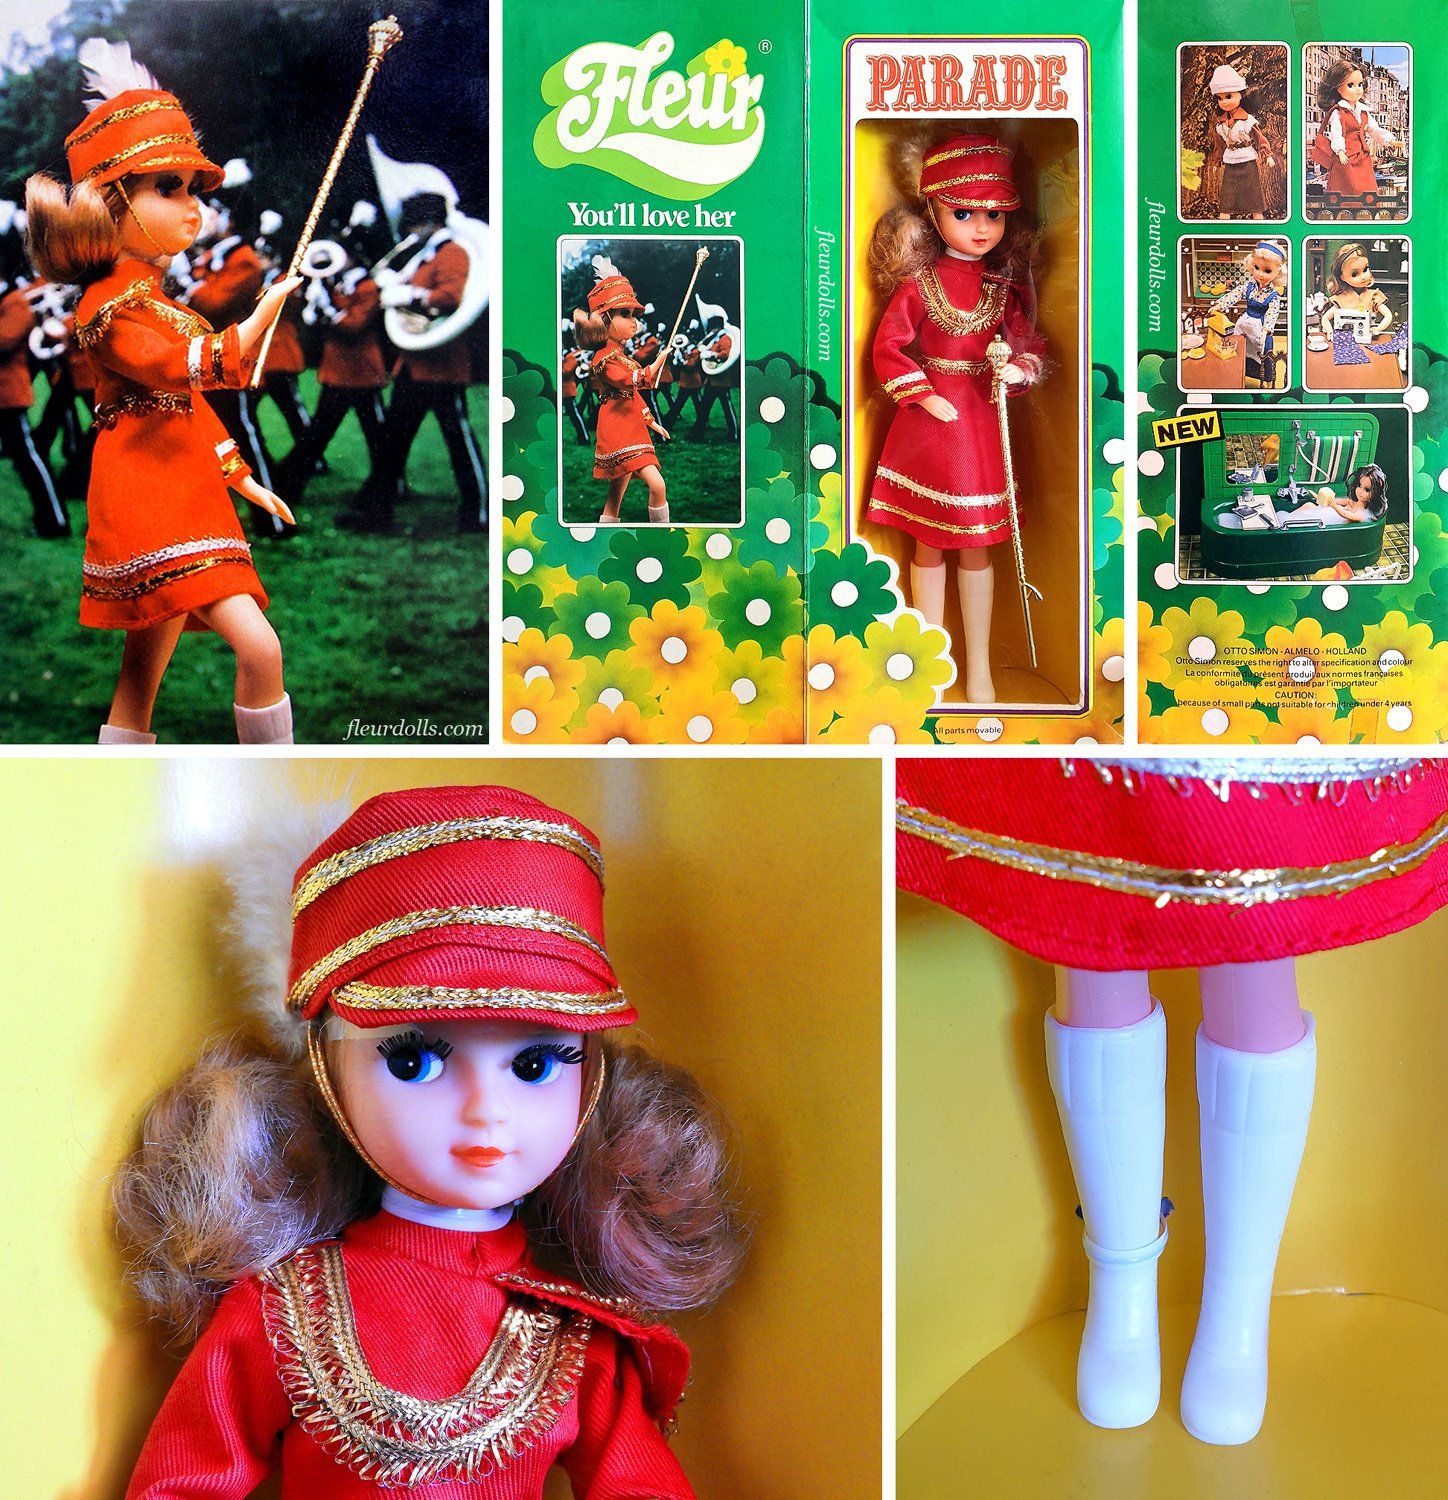 Dutch Fleur doll Parade made by Otto Simon in the 1980s in red majorette outfit.